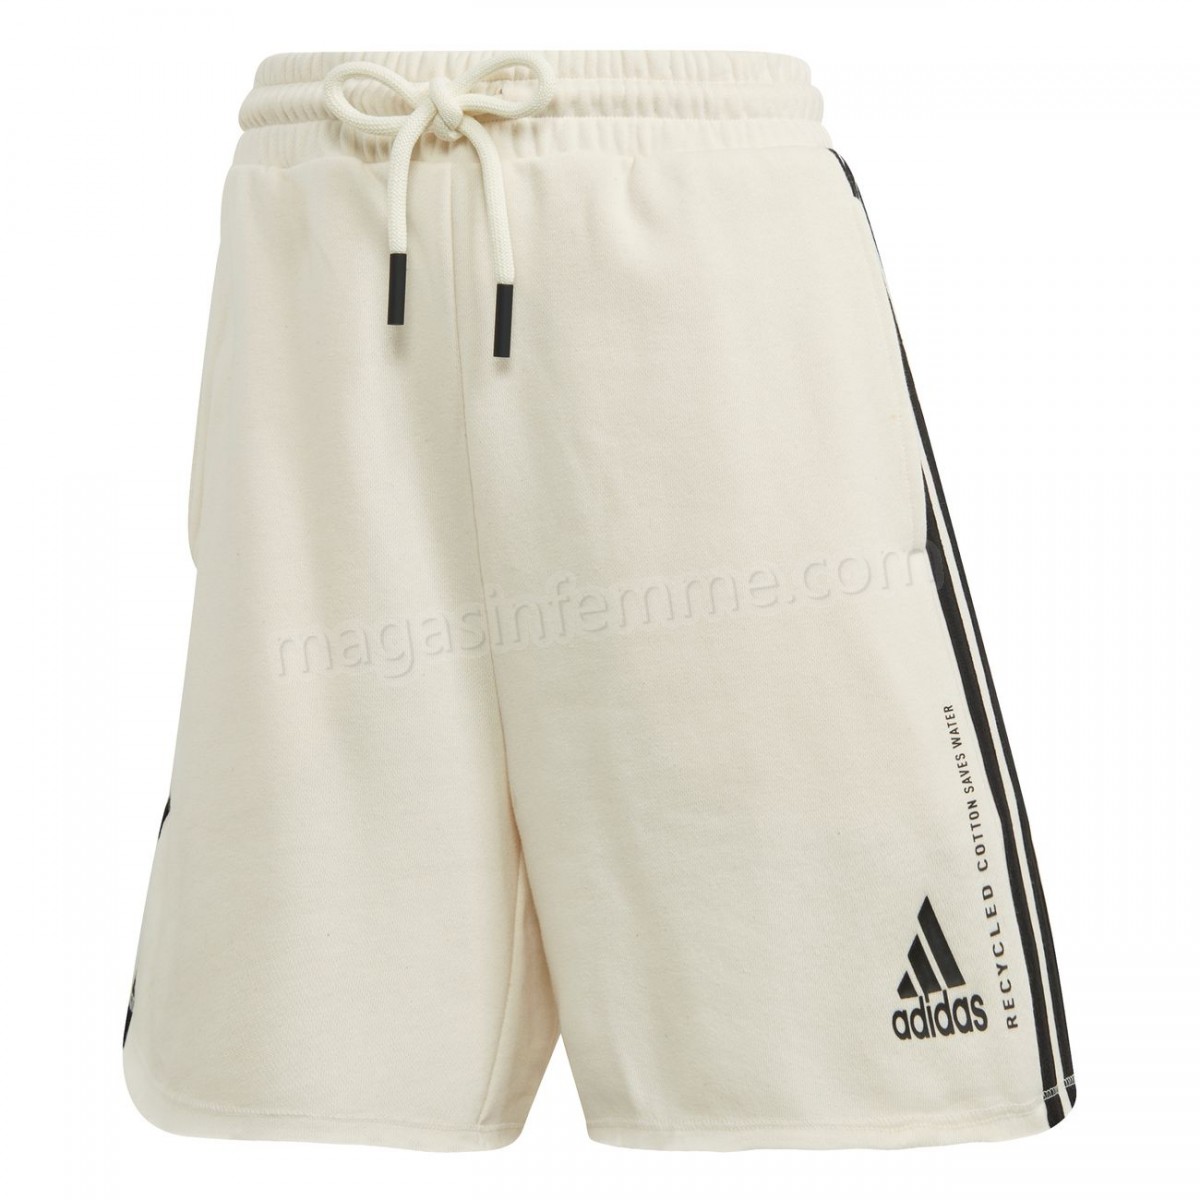 Adidas-Fitness femme ADIDAS Short femme adidas Must Haves Recycled Cotton en solde - -1